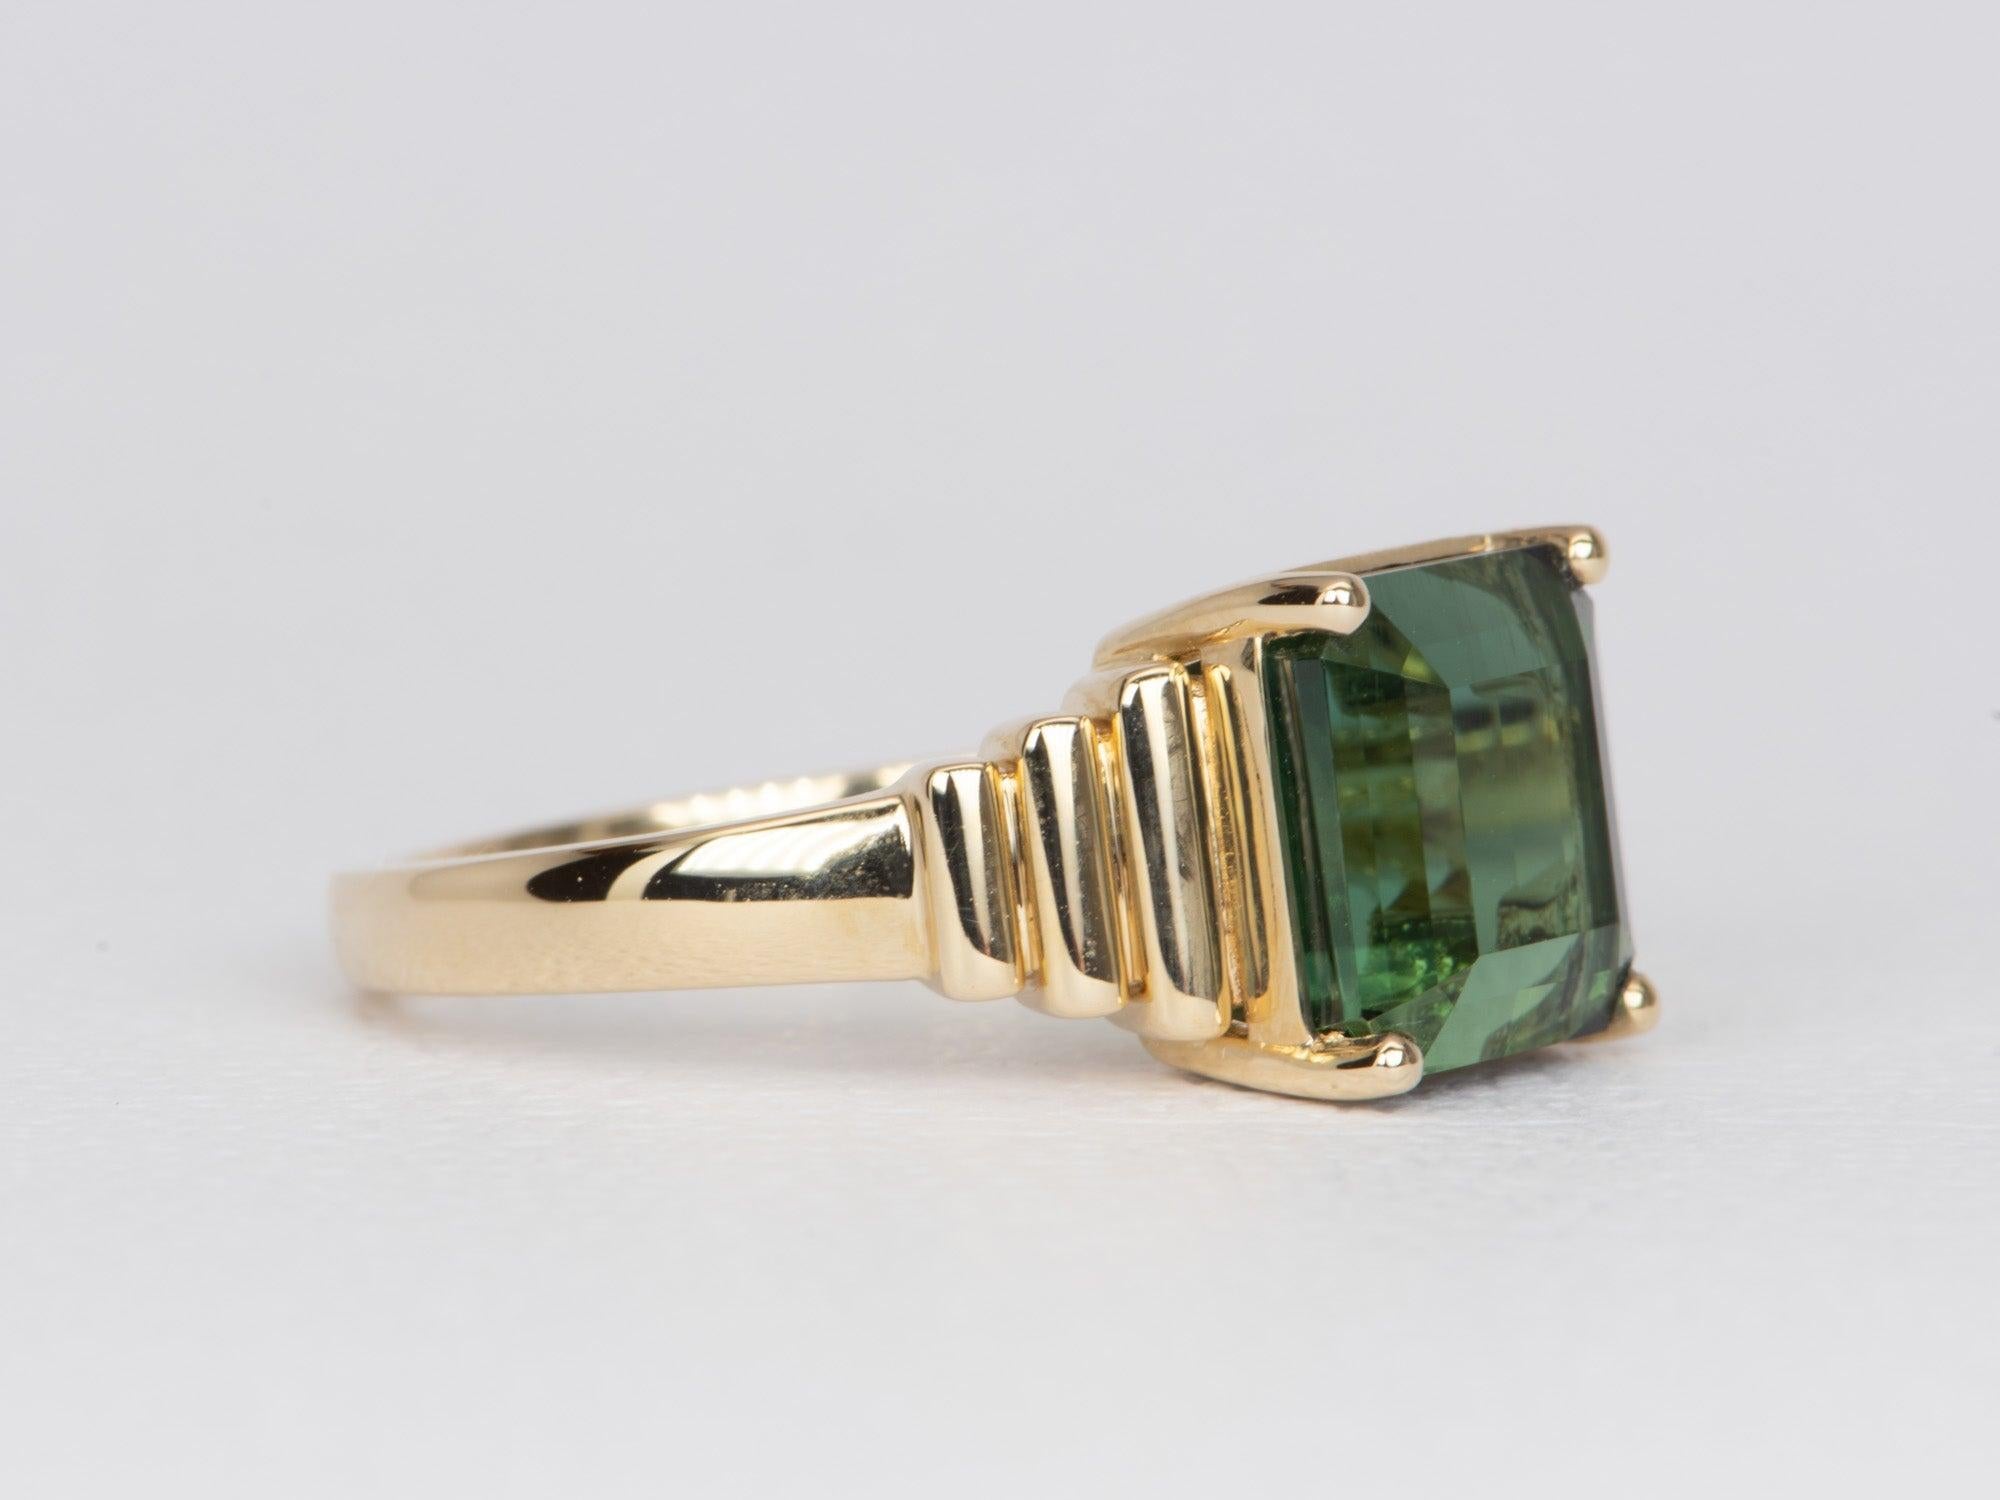 Square Cut 5.55 Carat Tourmaline on Wide Ribbed Design 14k Gold Engagement Ring R6477 For Sale